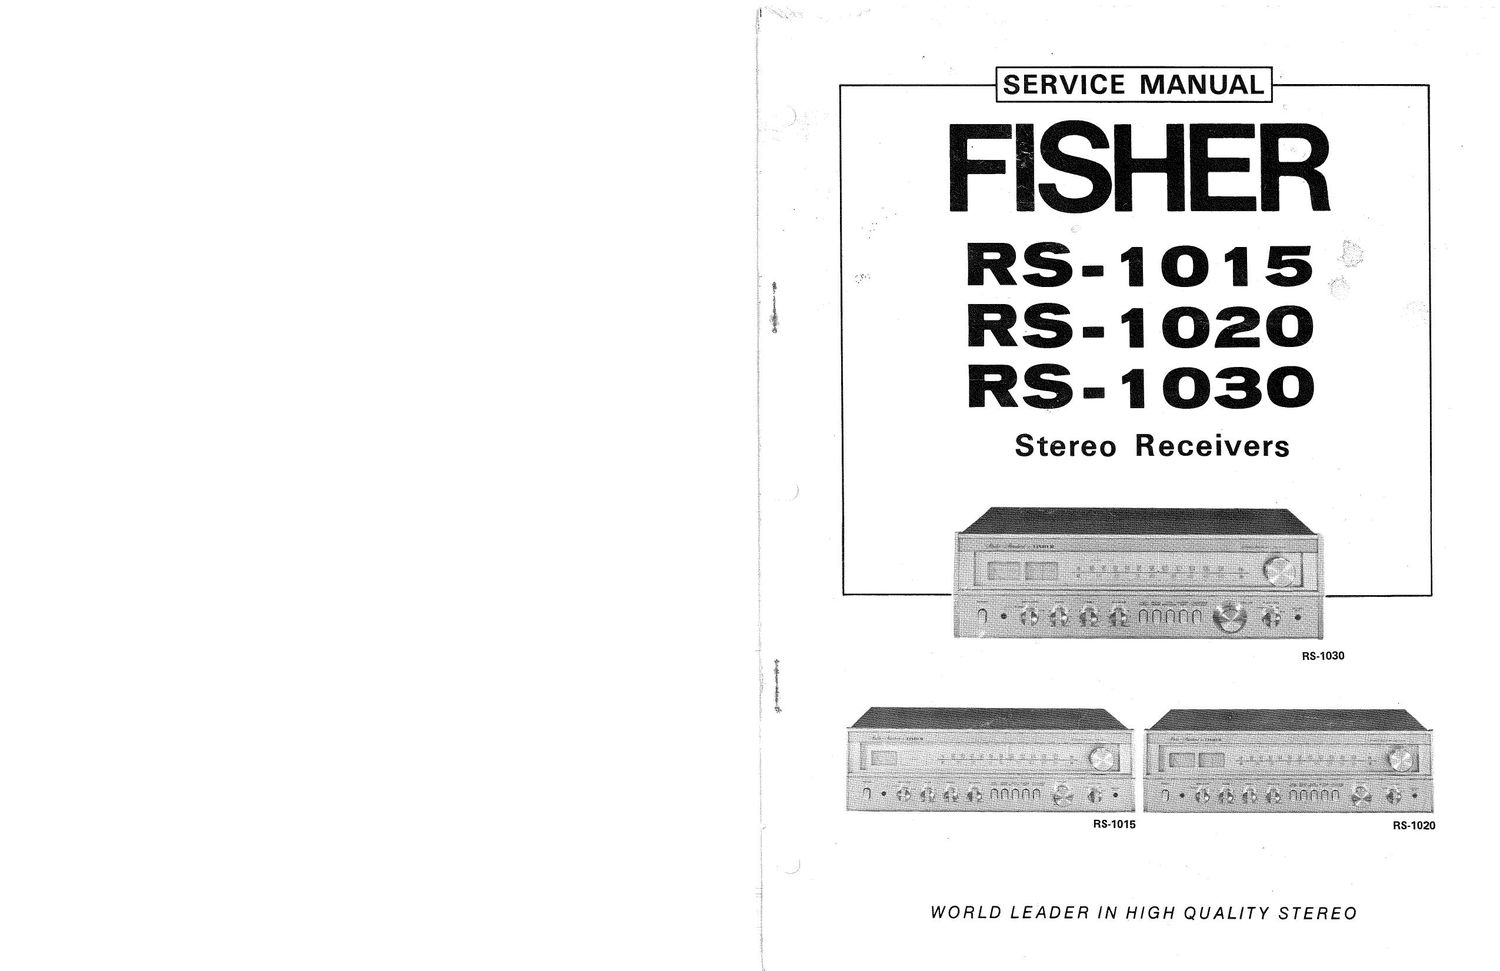 Fisher RS 1015 Service Manual